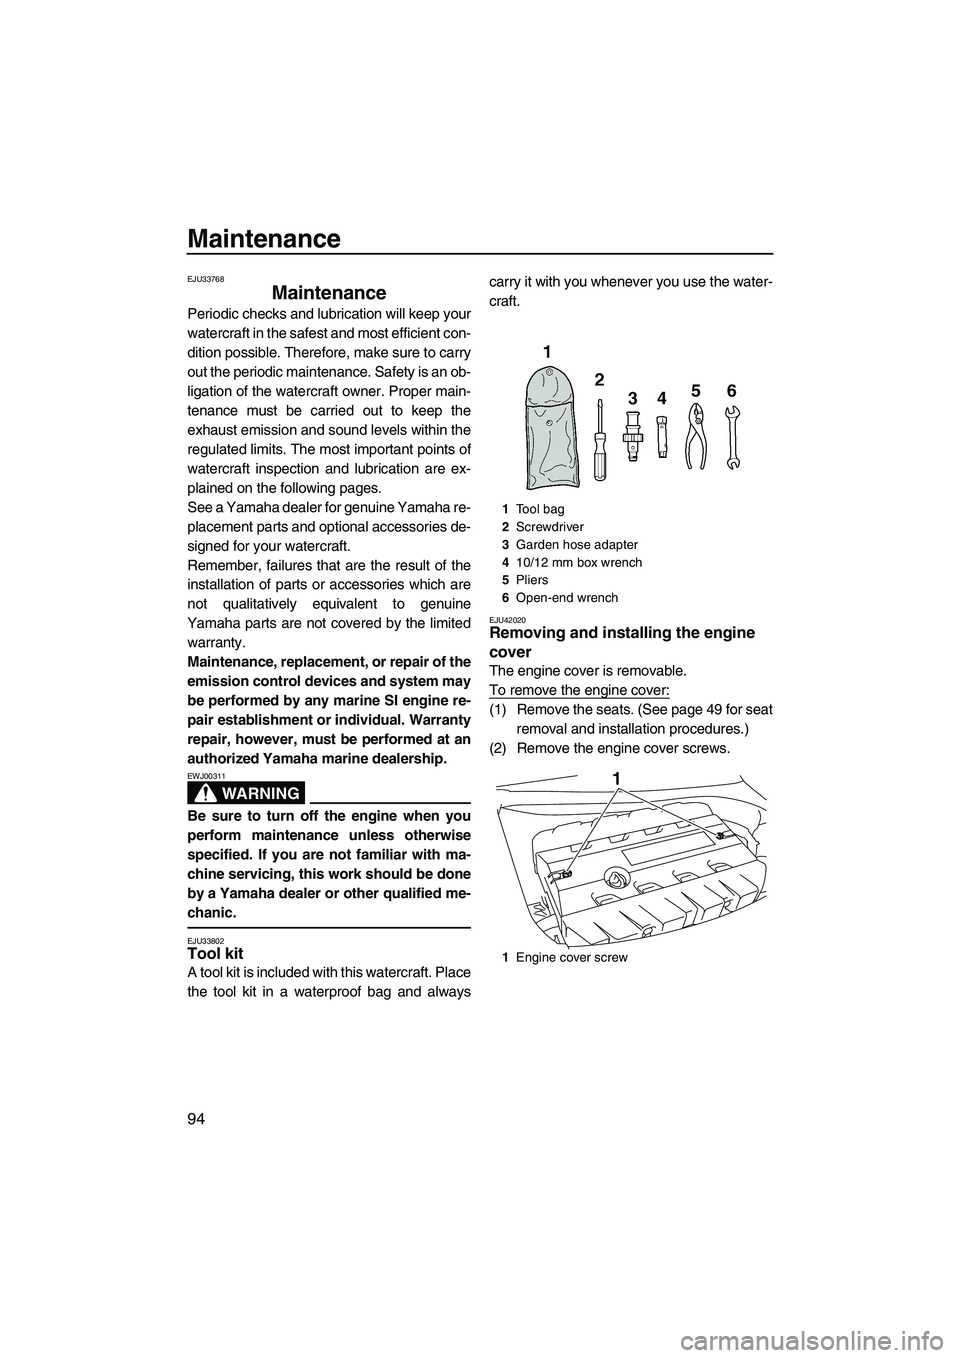 YAMAHA FX HO 2013  Owners Manual Maintenance
94
EJU33768
Maintenance 
Periodic checks and lubrication will keep your
watercraft in the safest and most efficient con-
dition possible. Therefore, make sure to carry
out the periodic mai